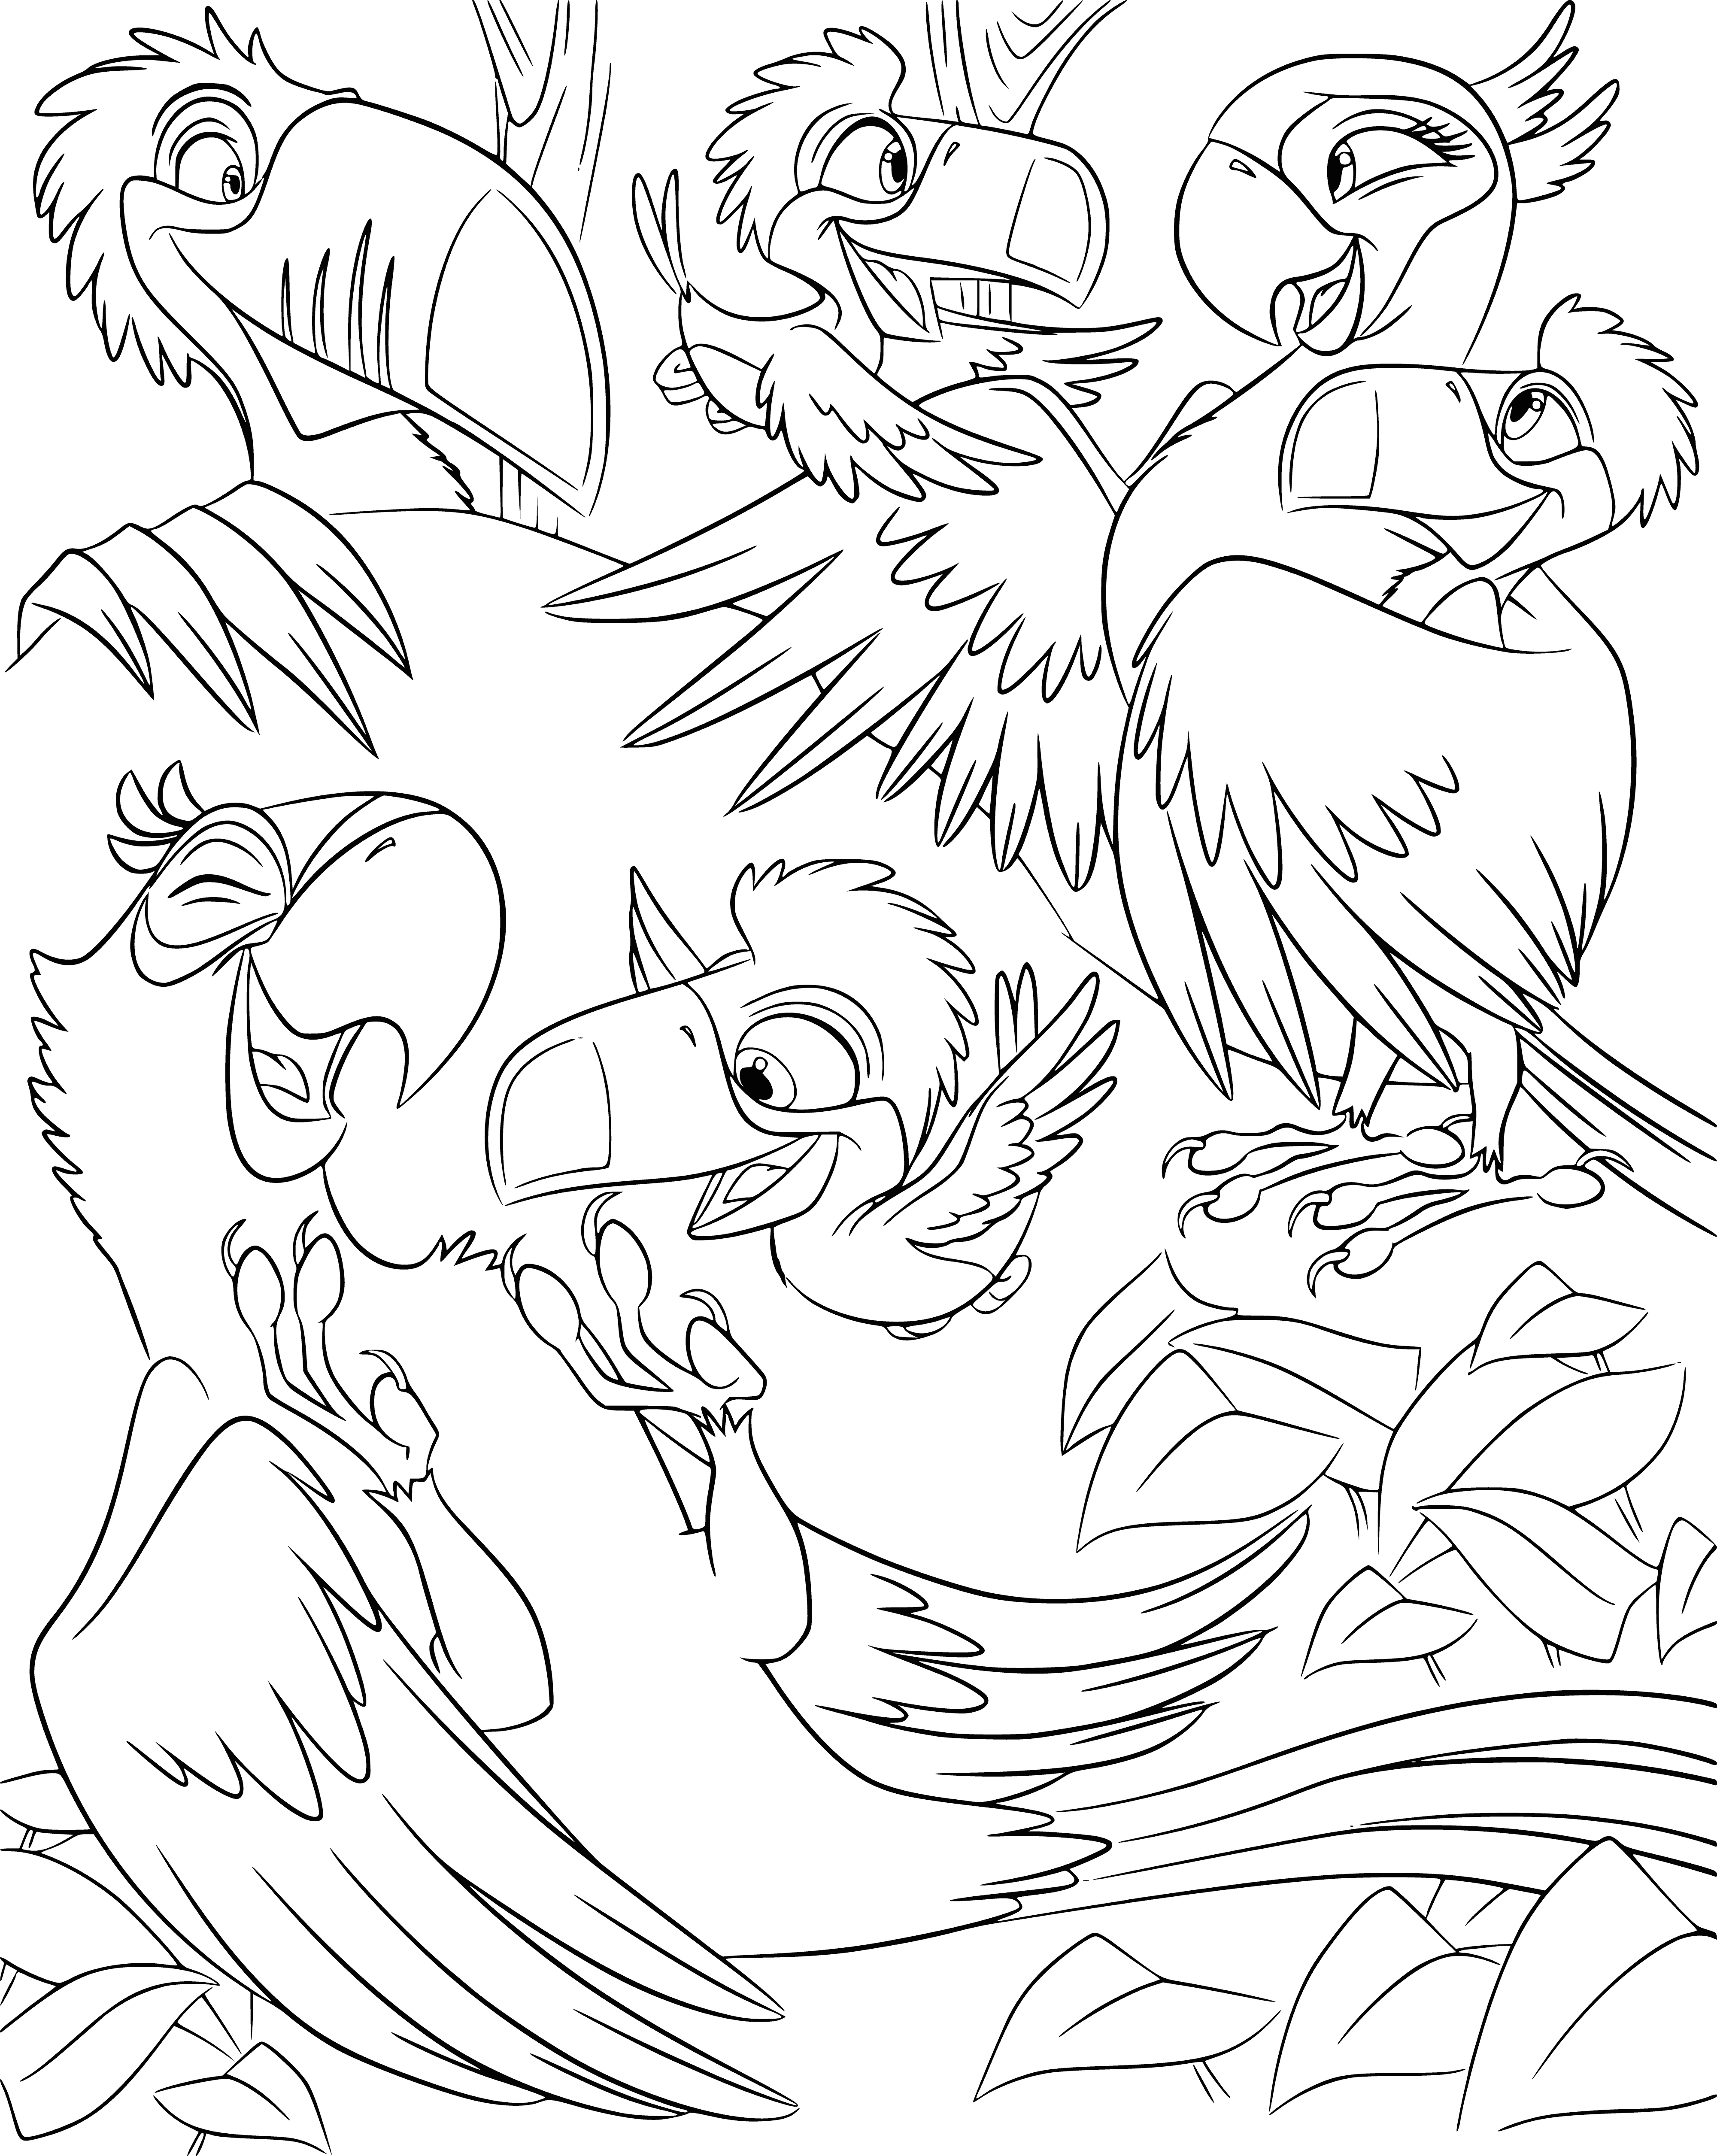 Happy together coloring page